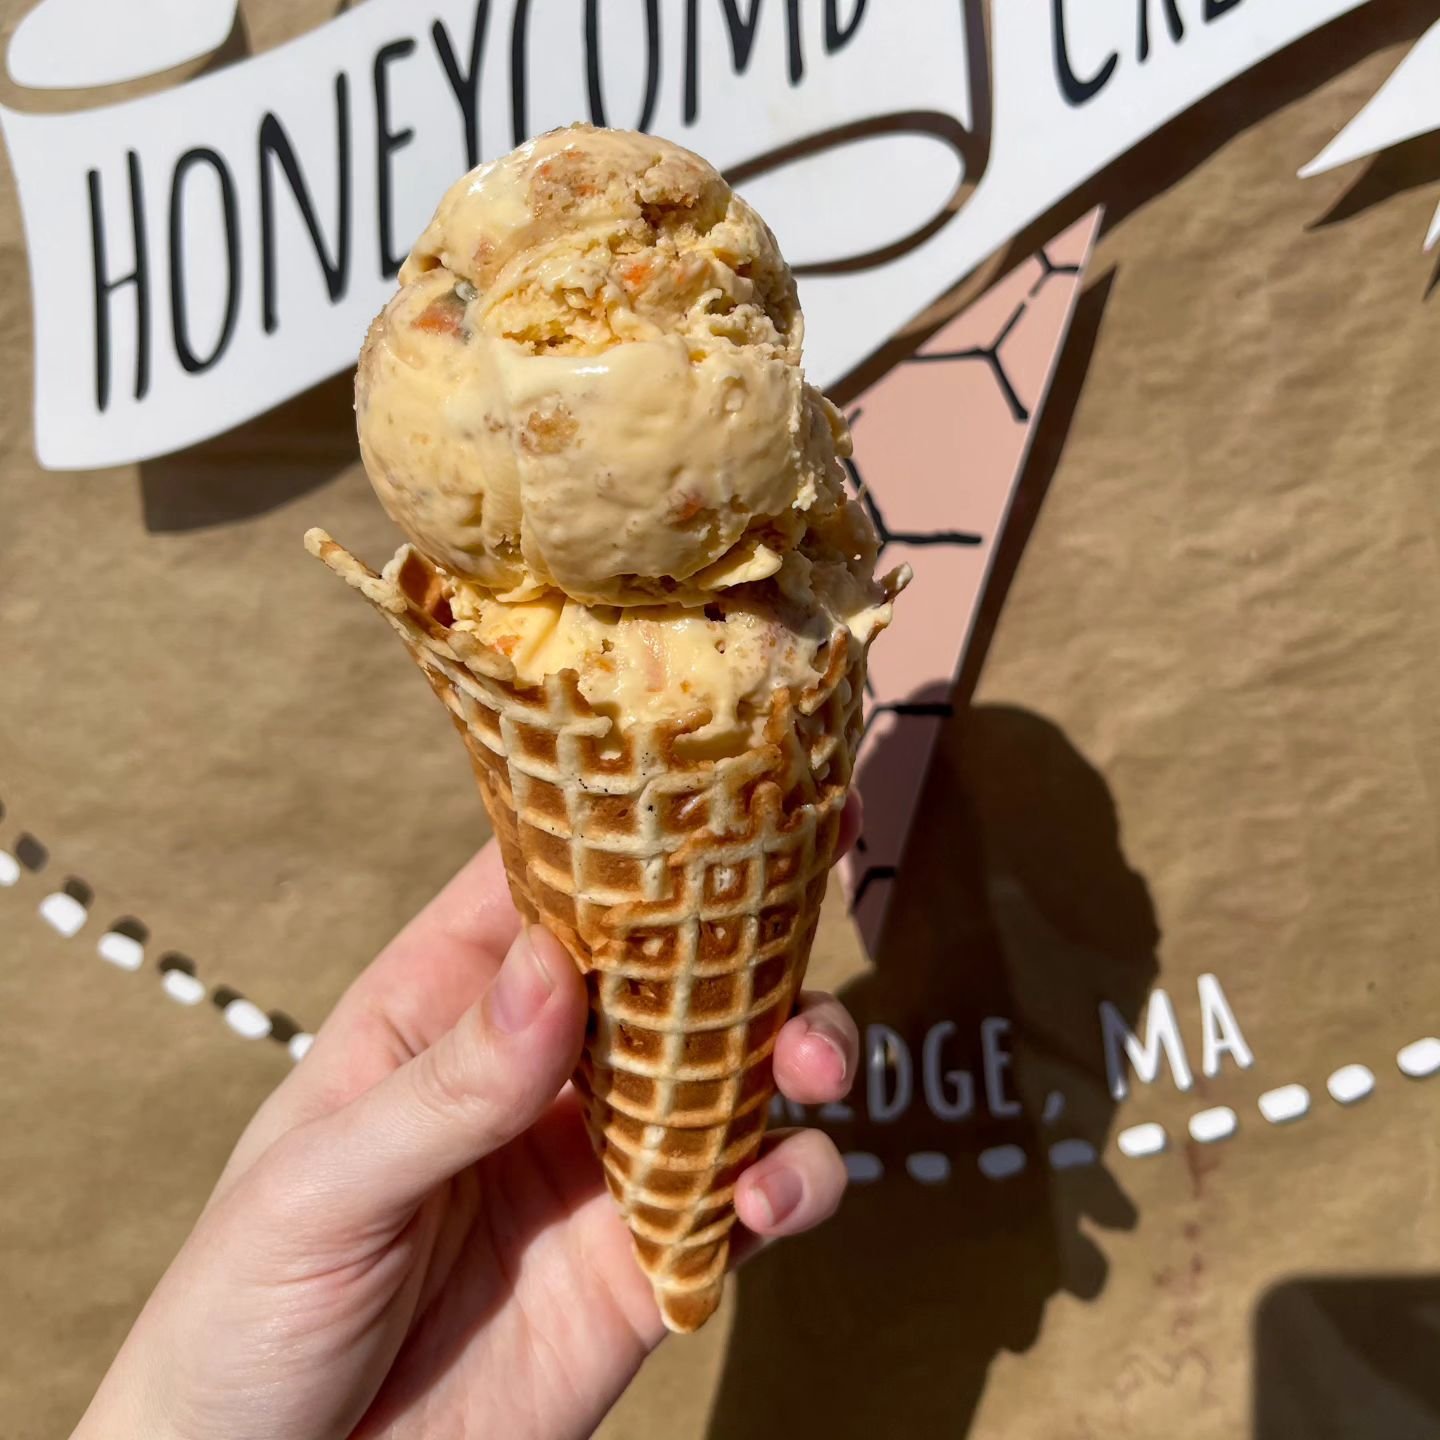 Happy Orthodox Easter and Cinco de Mayo! If you're looking for a sweet treat to celebrate either, we're open from 12-10 today with a cabinet full of tasty flavors. That includes our Easter-appropriate Bunny Tracks ice cream, which we're still scoopin